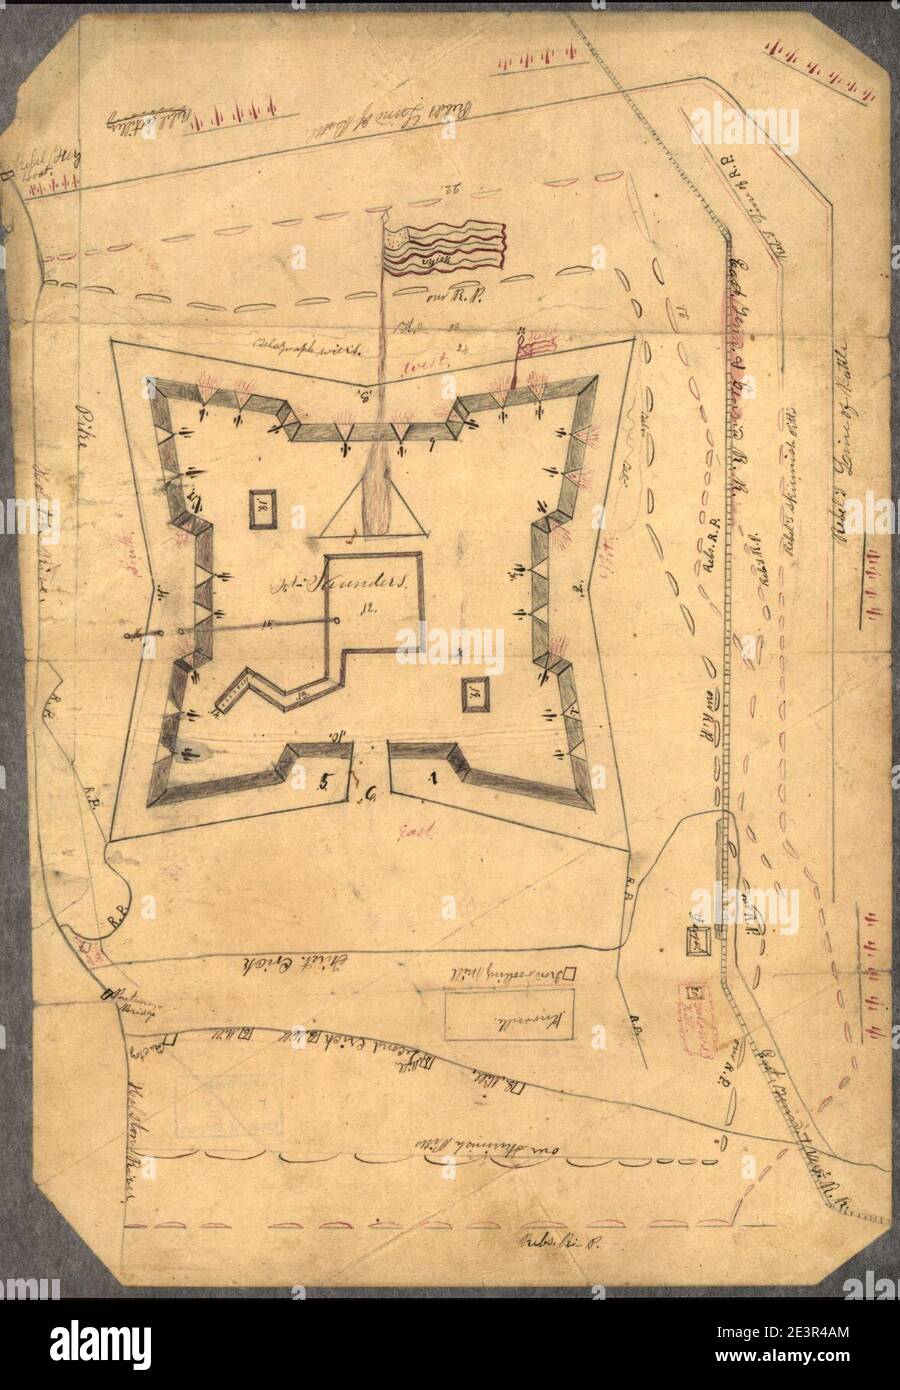 Map of Fort Sanders, Knoxville, Tennessee, showing the Confederate assault of Nov. 29, 1863. Stock Photo